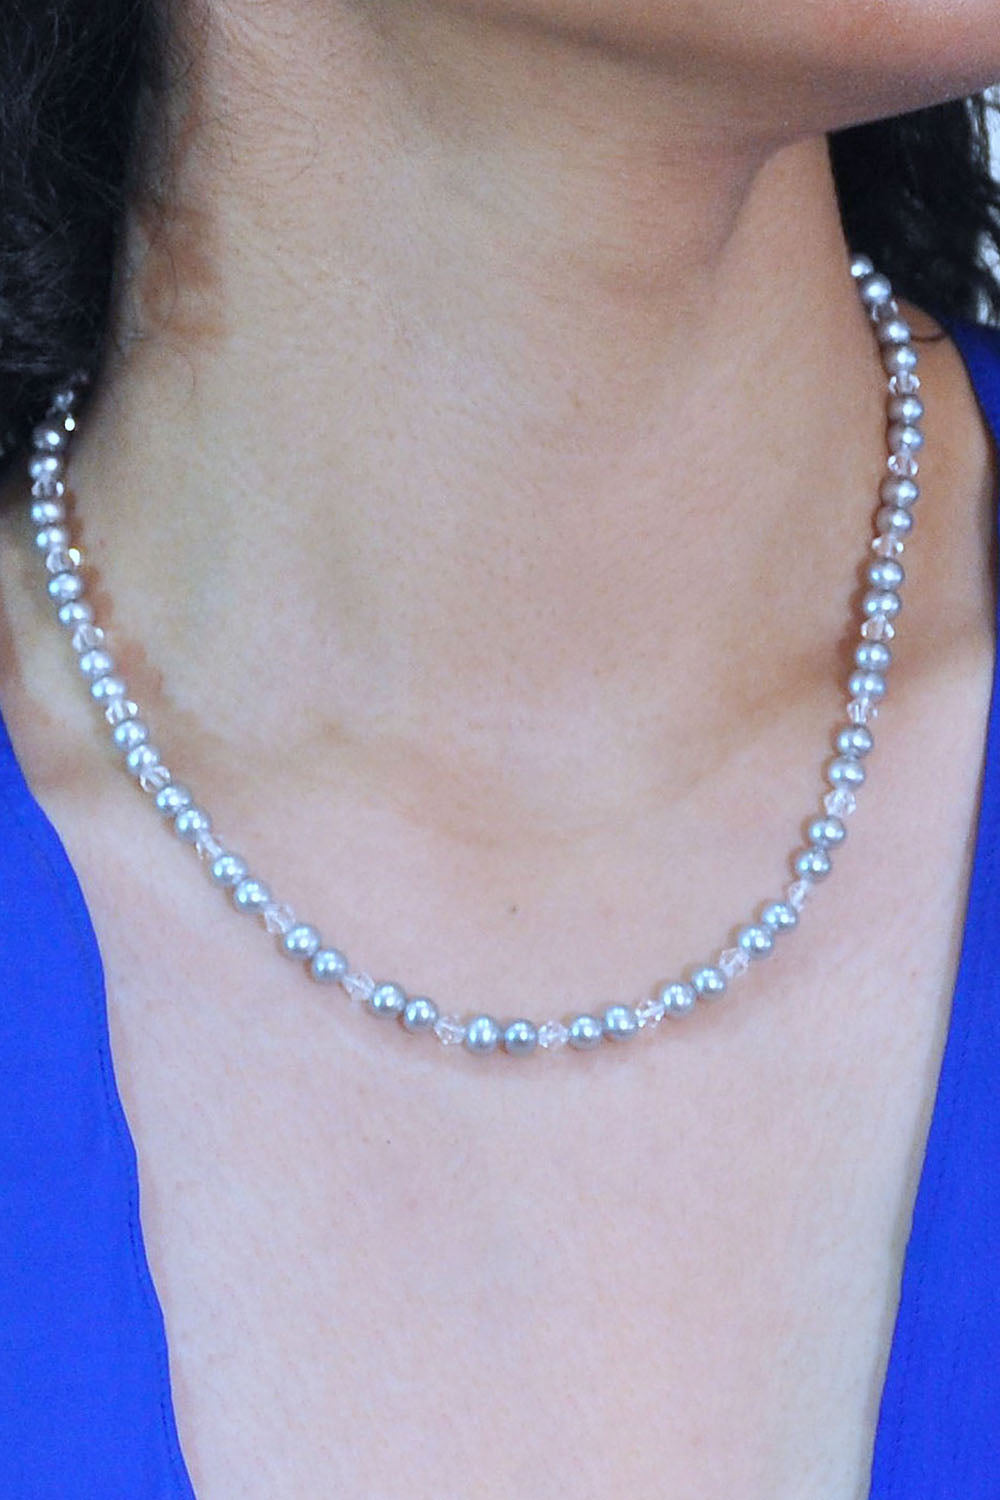 Sivalya Athens Gray Pearls Strand Necklace in Sterling Silver